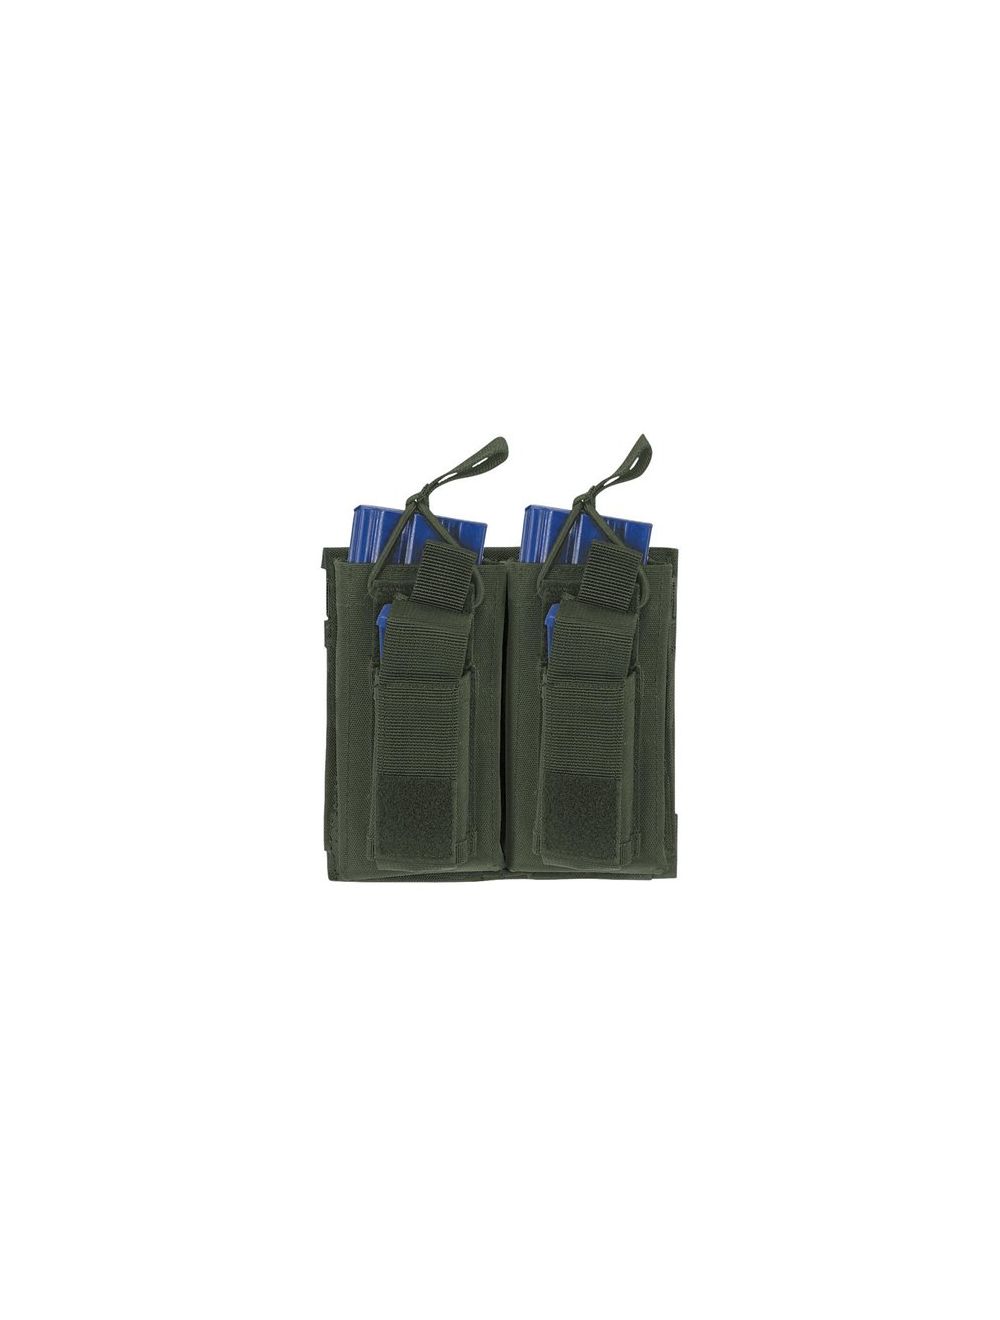 The Peacekeeper Dual Mag Pouch